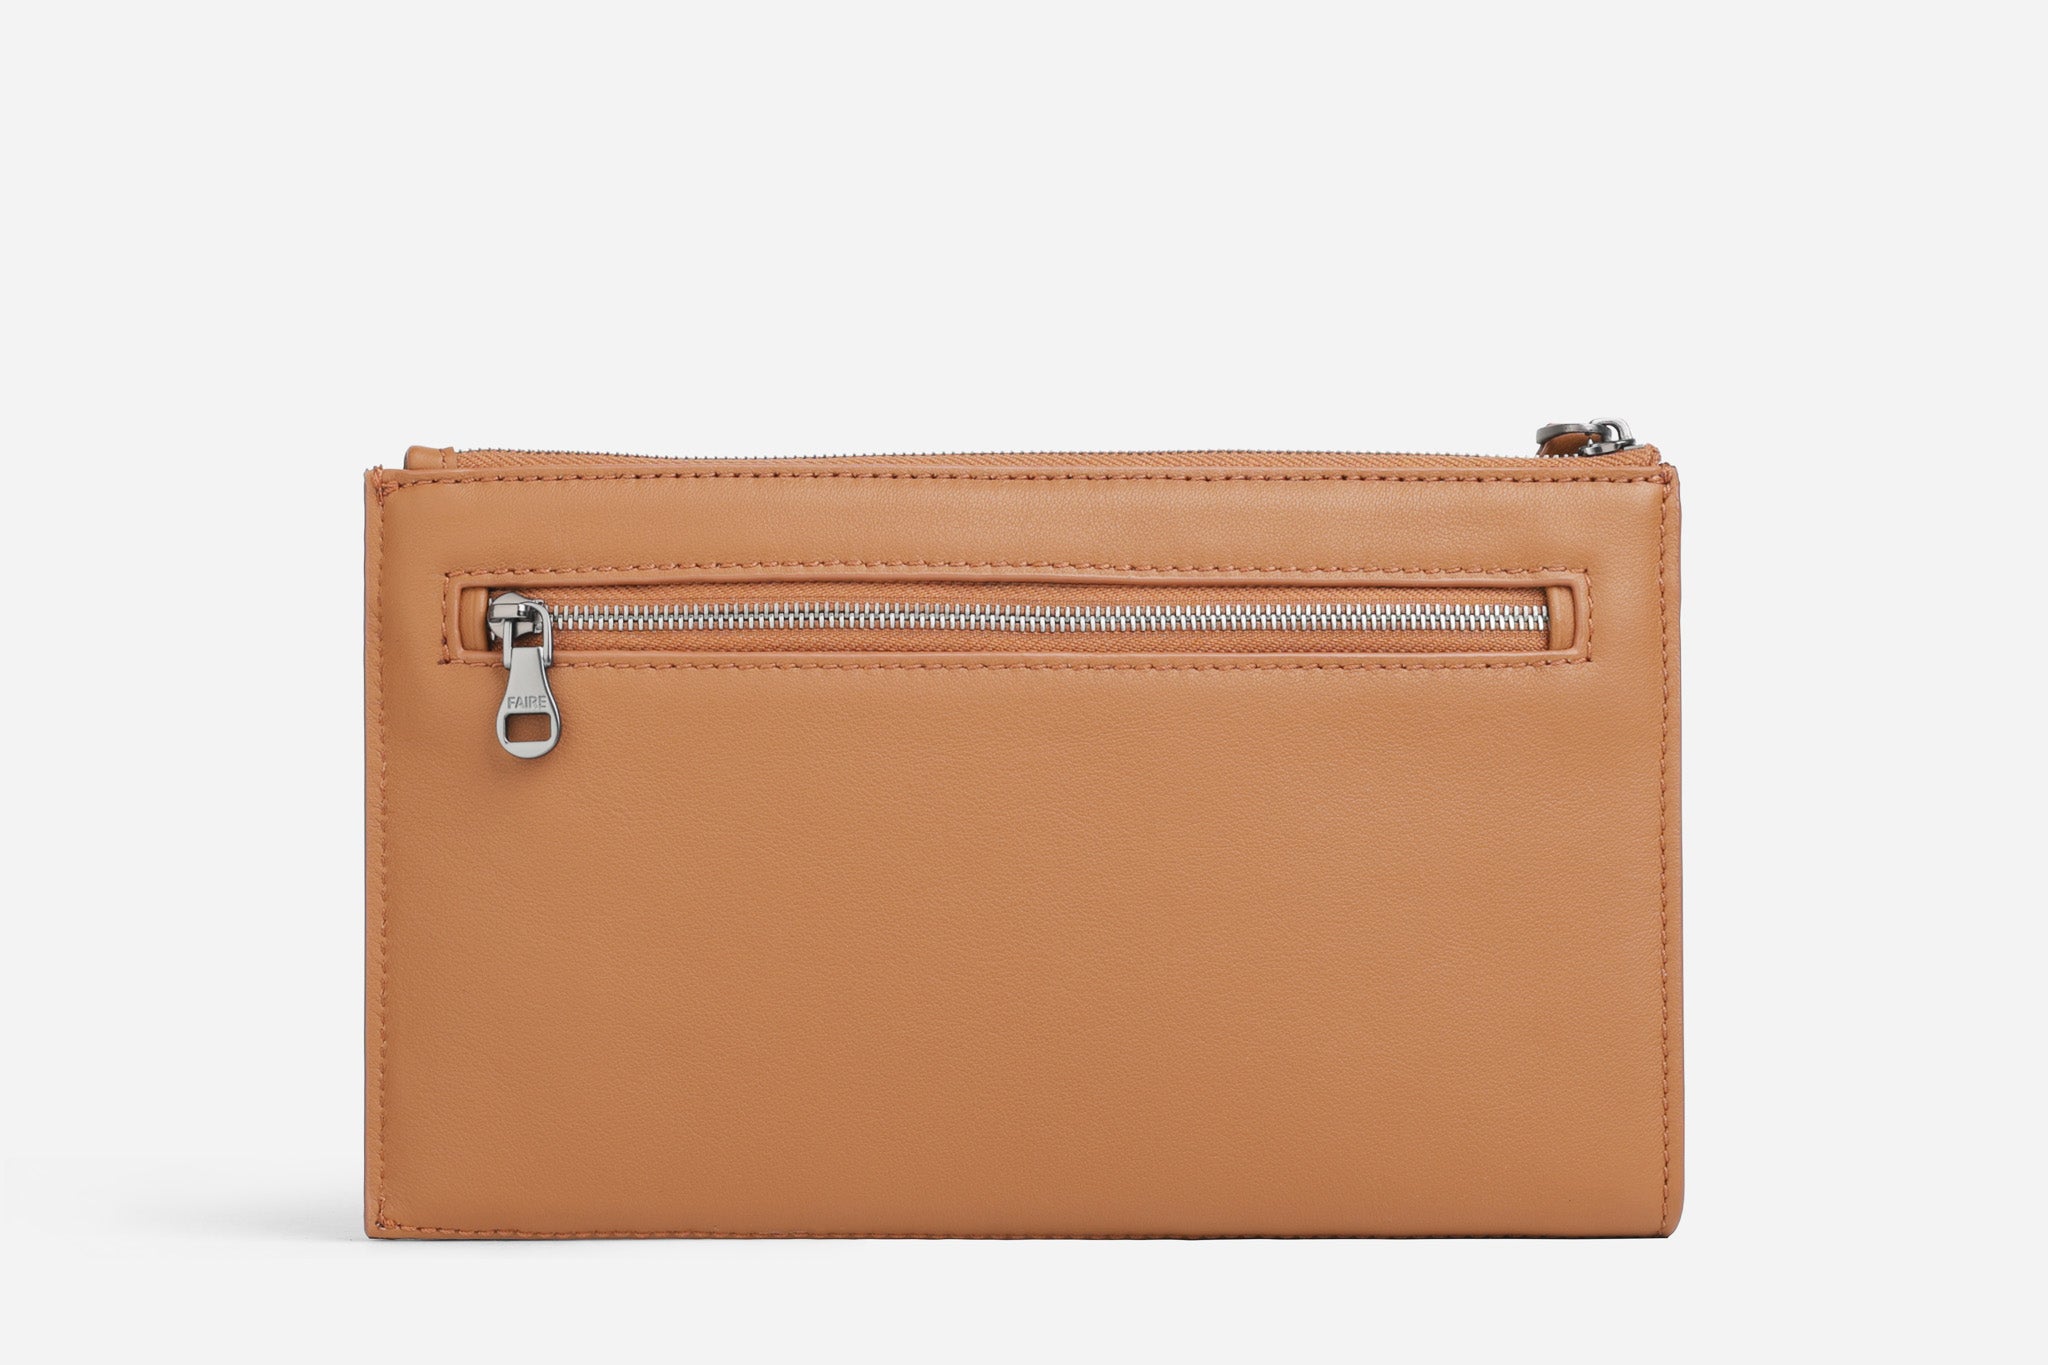 Ross Everyday Clutch - SMO Caramel | Outlet